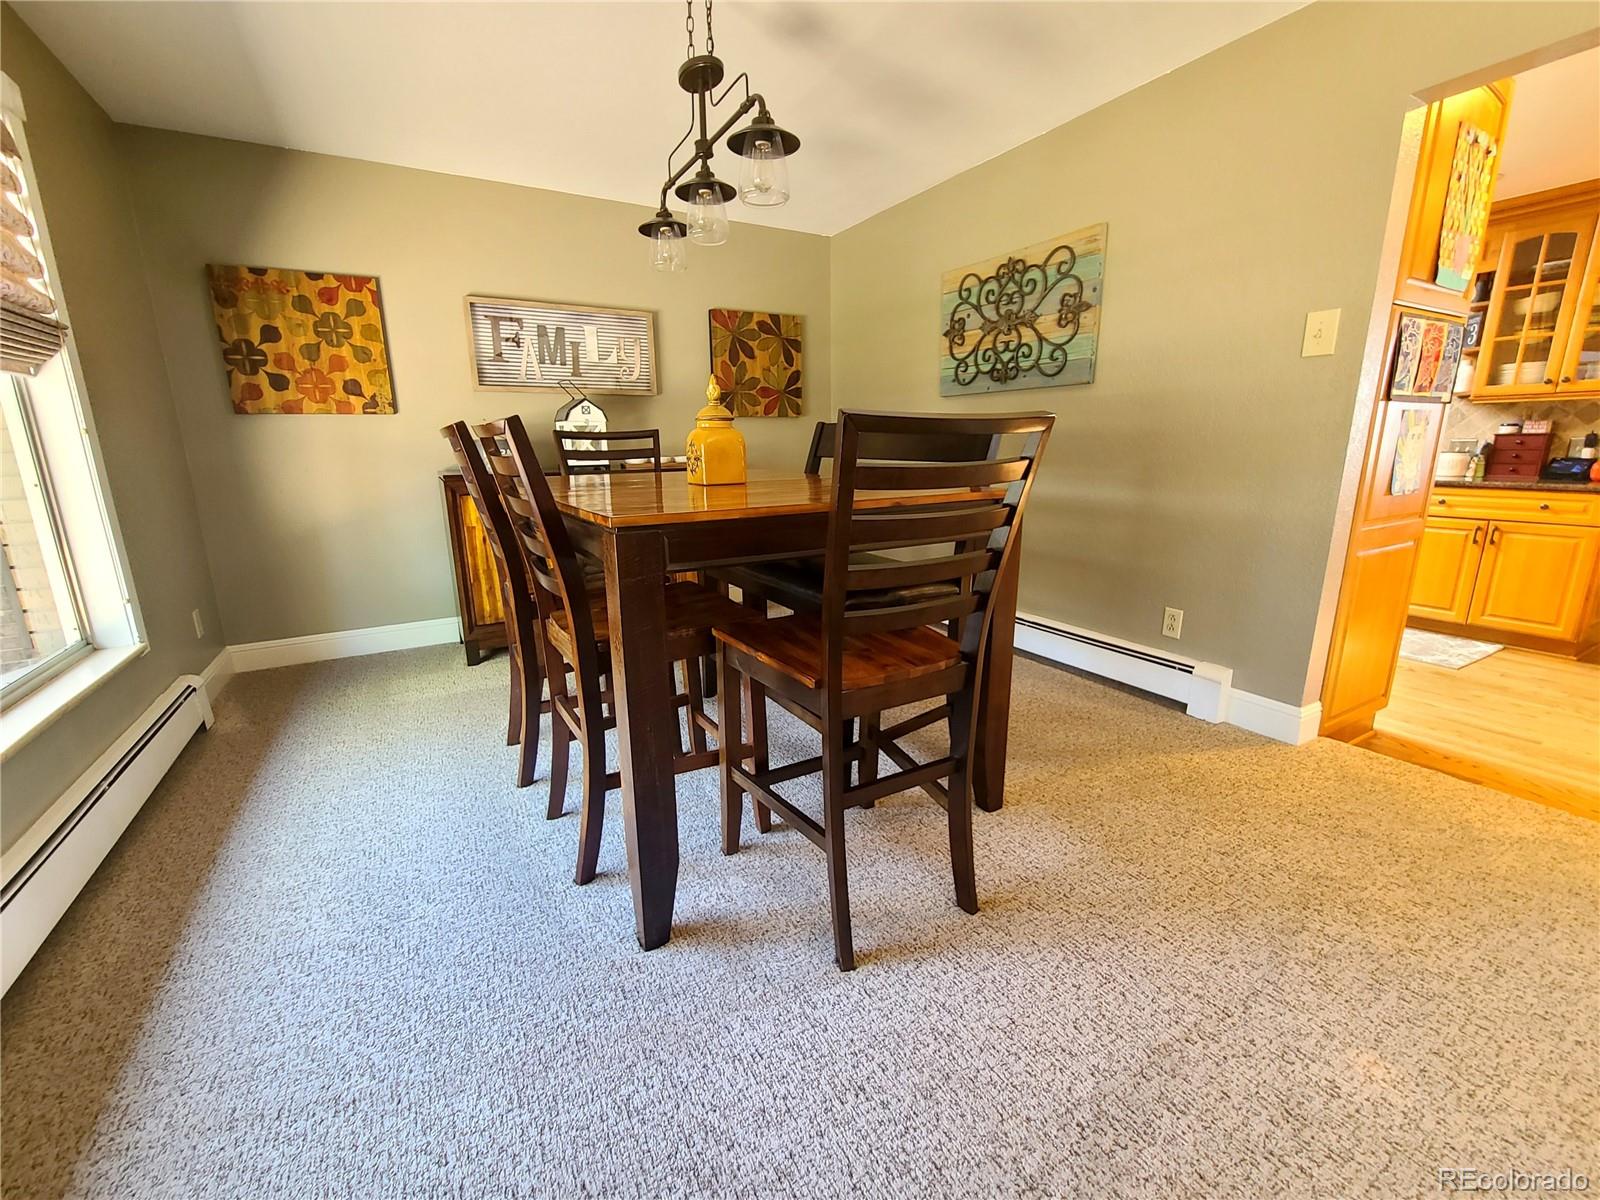 7085 94th, Westminster, CO